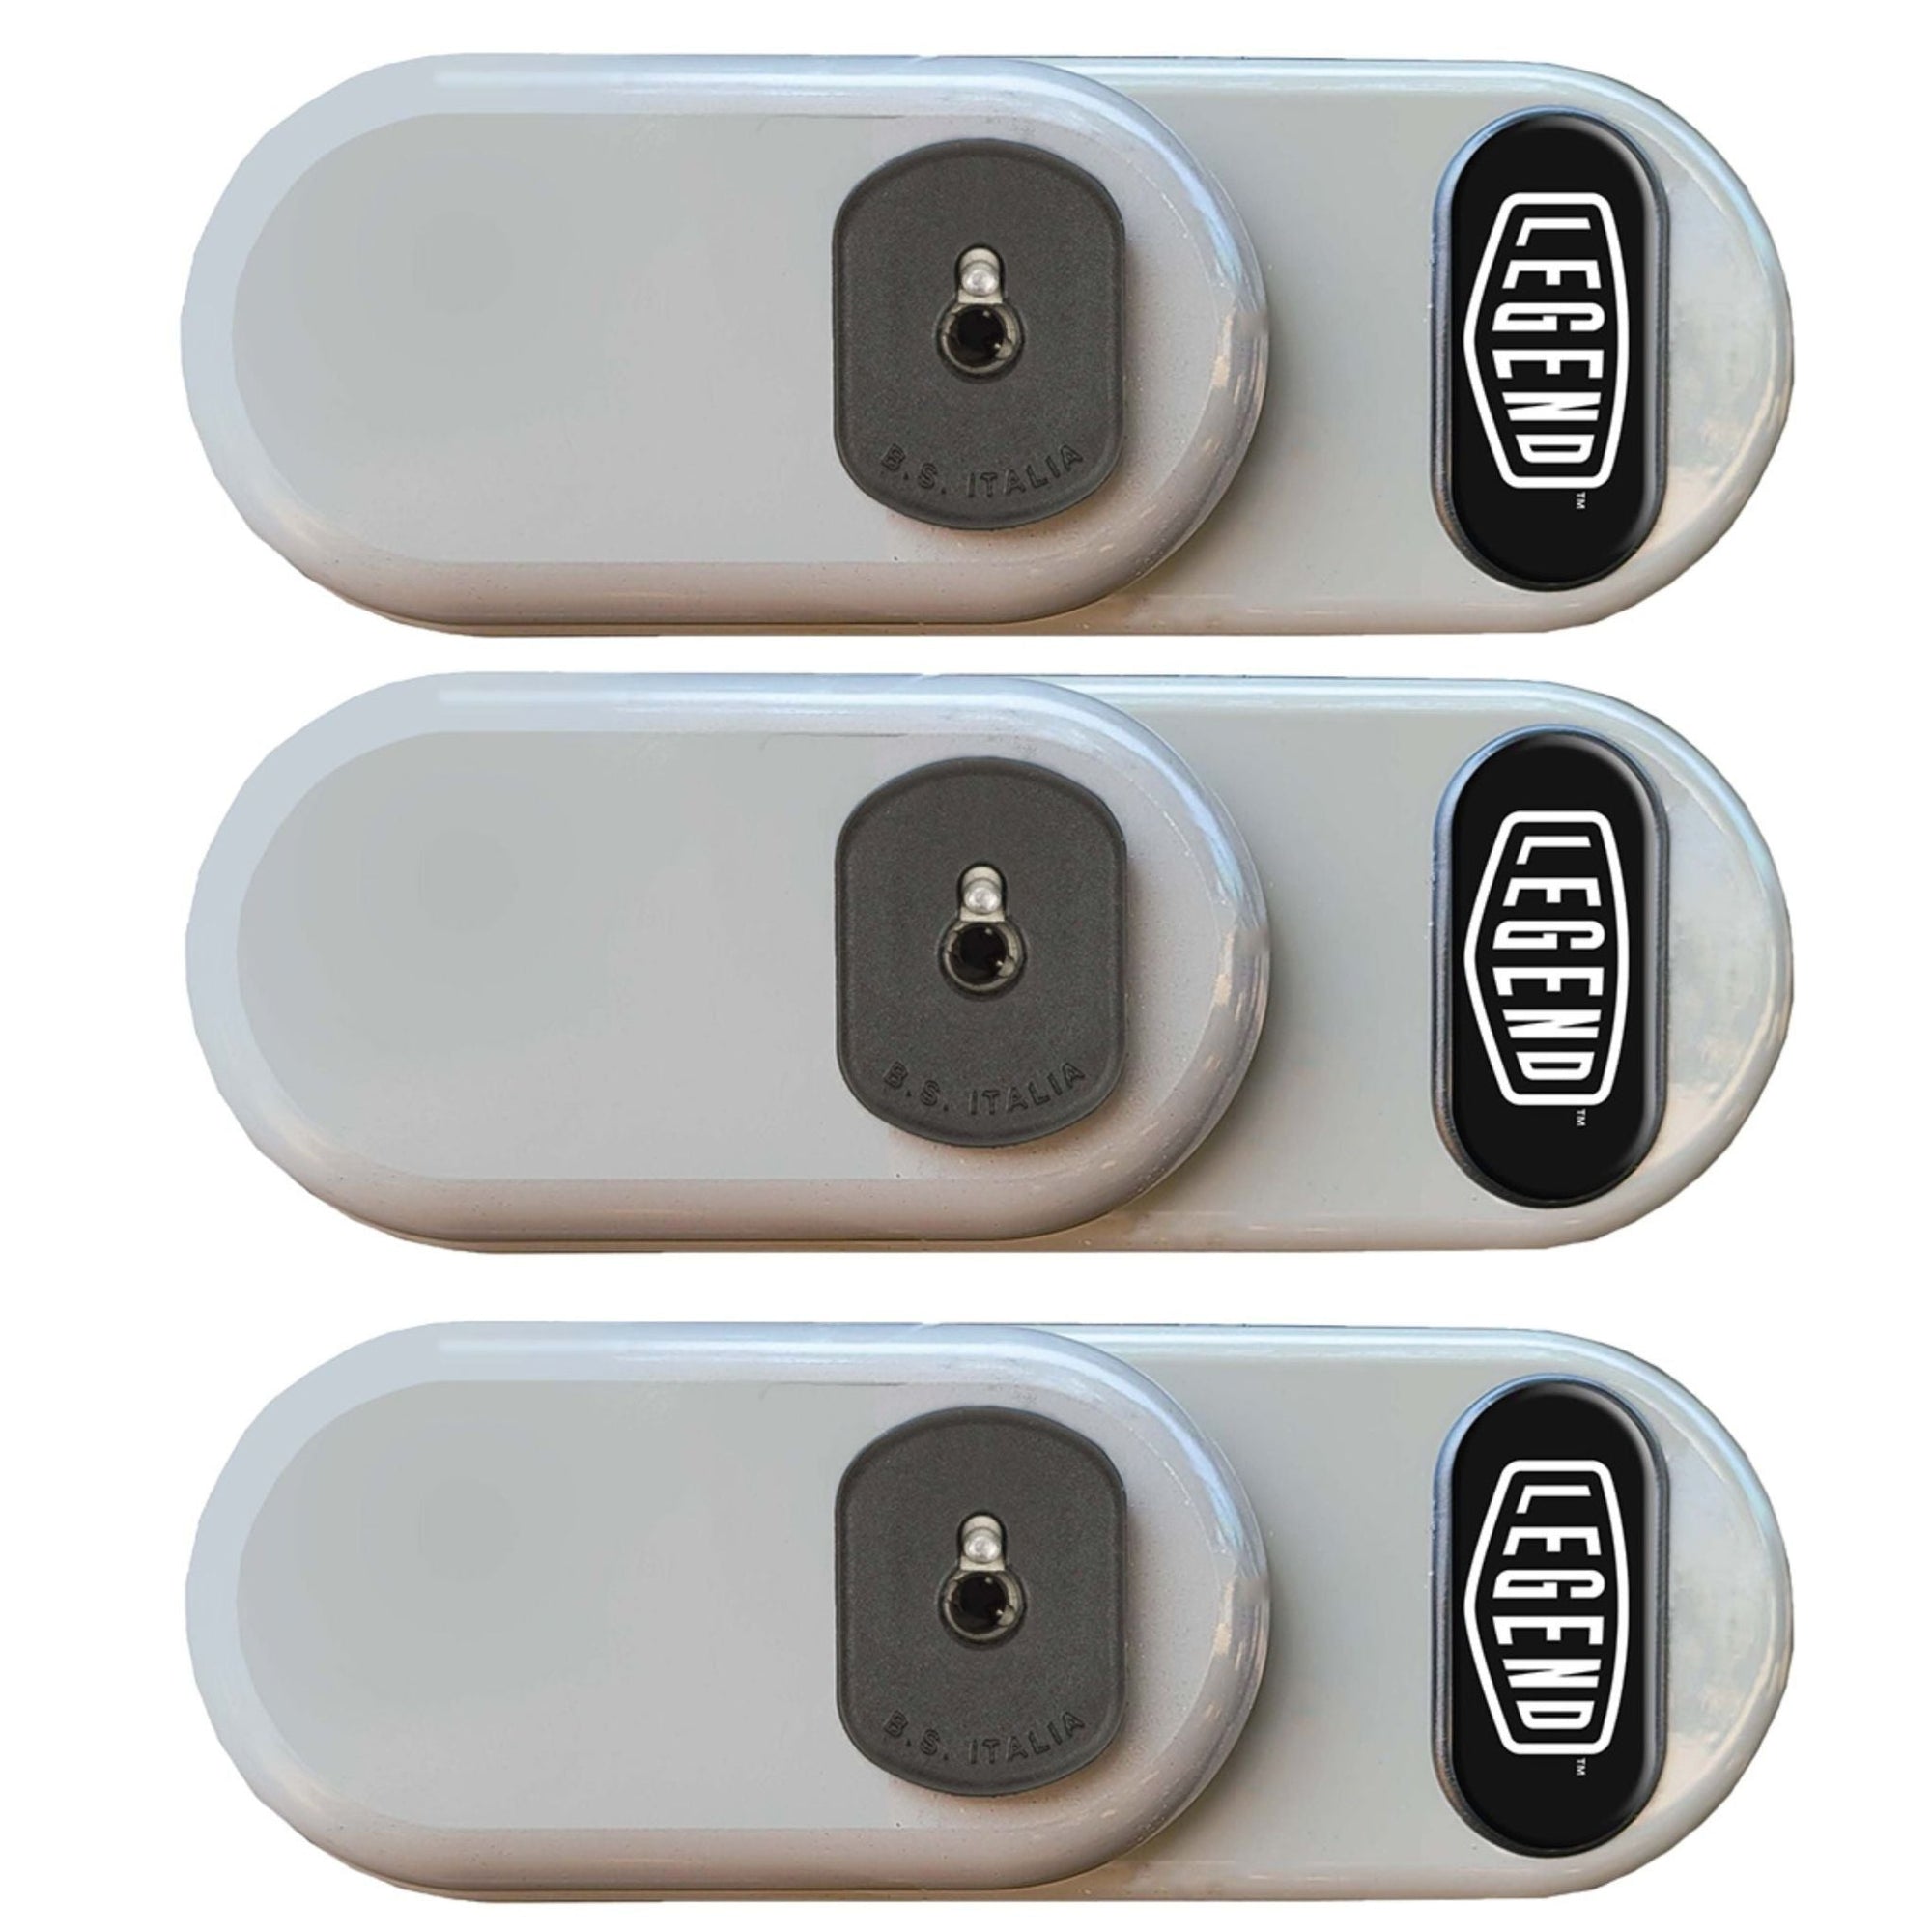 The New Securi-Lock SL2-021-003 Triple Padlock Is a High Security Vehicle Door Lock That Affixes to the Rear and Side of Van Doors for Complete Protection and Safety Against Cargo Theft - The Lock Source